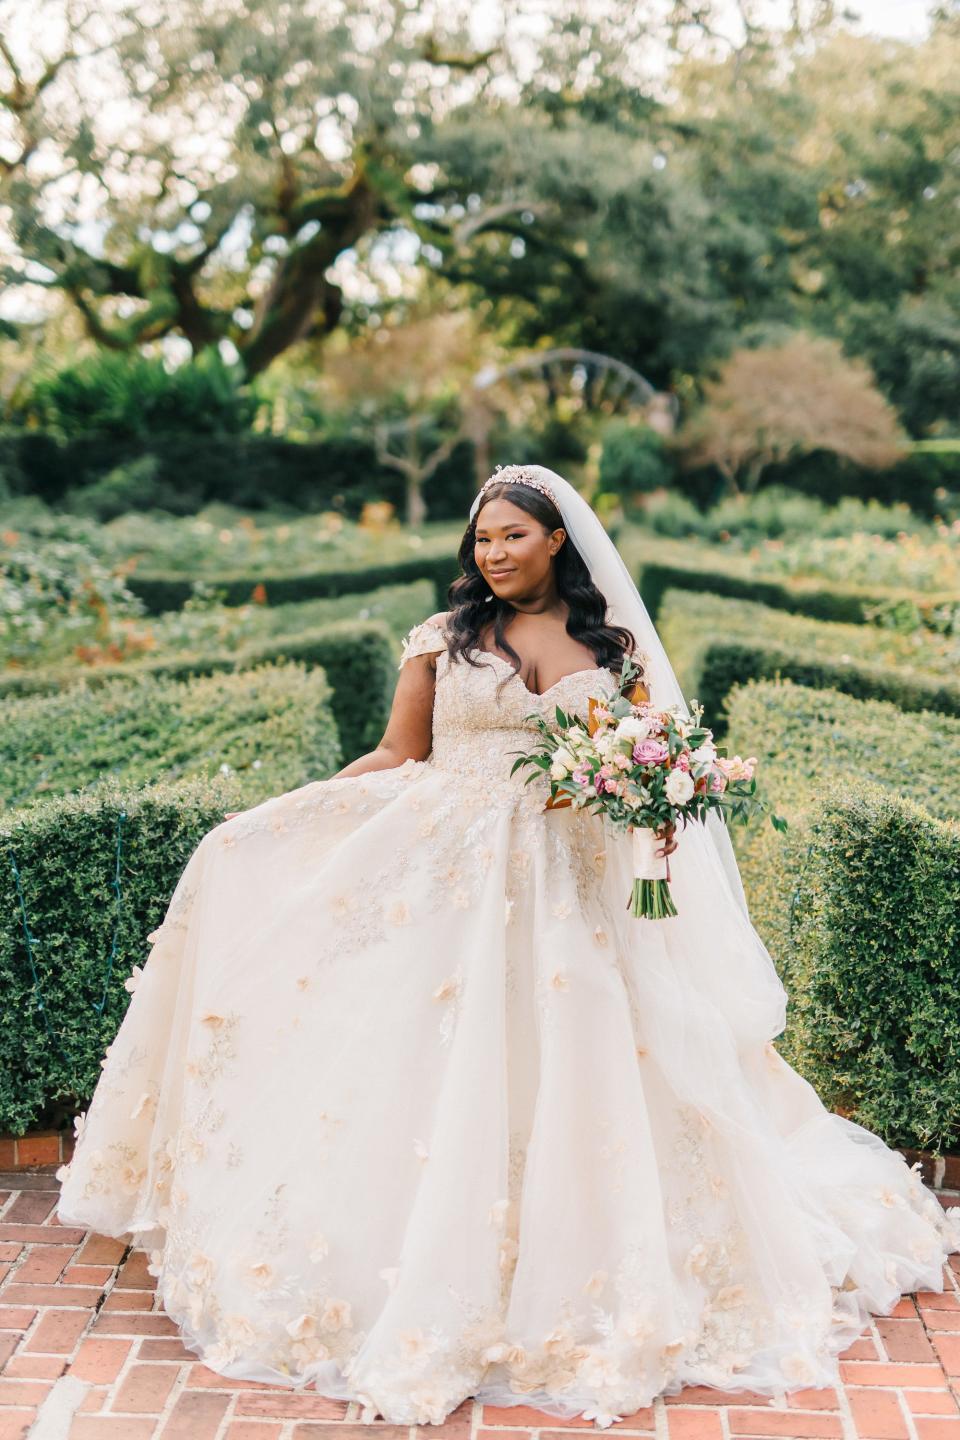 A bride poses in her wedding dress in front of greenery.